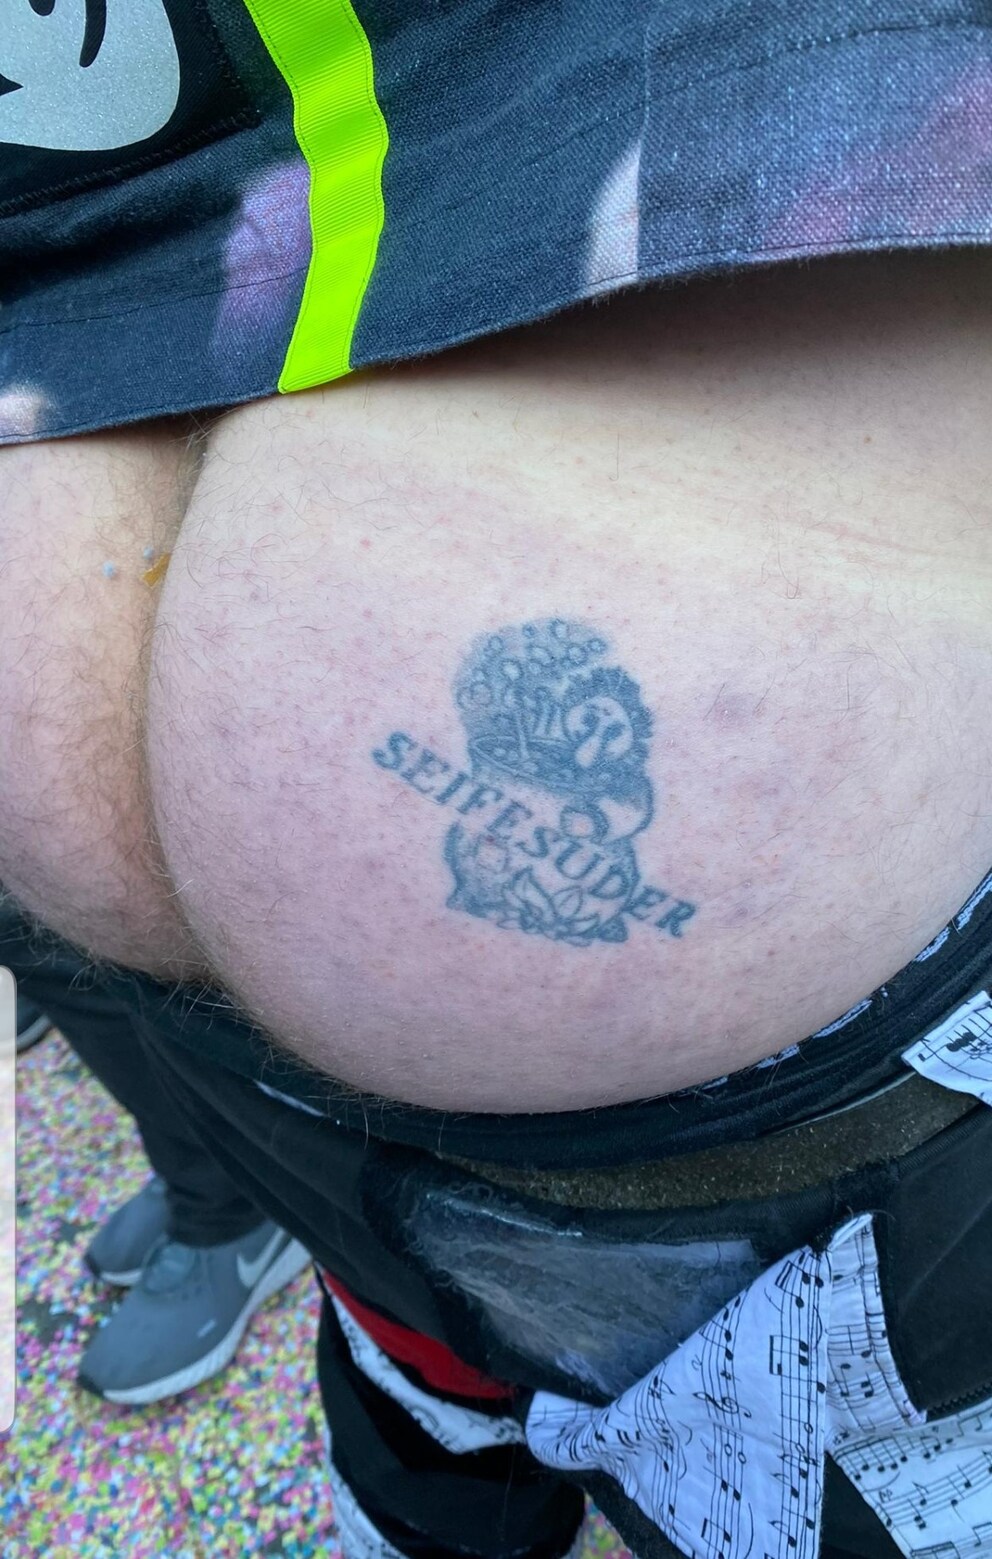 Many find carnival a pain in the butt. Others have the name of their marching band (Gugge) tattooed on it.